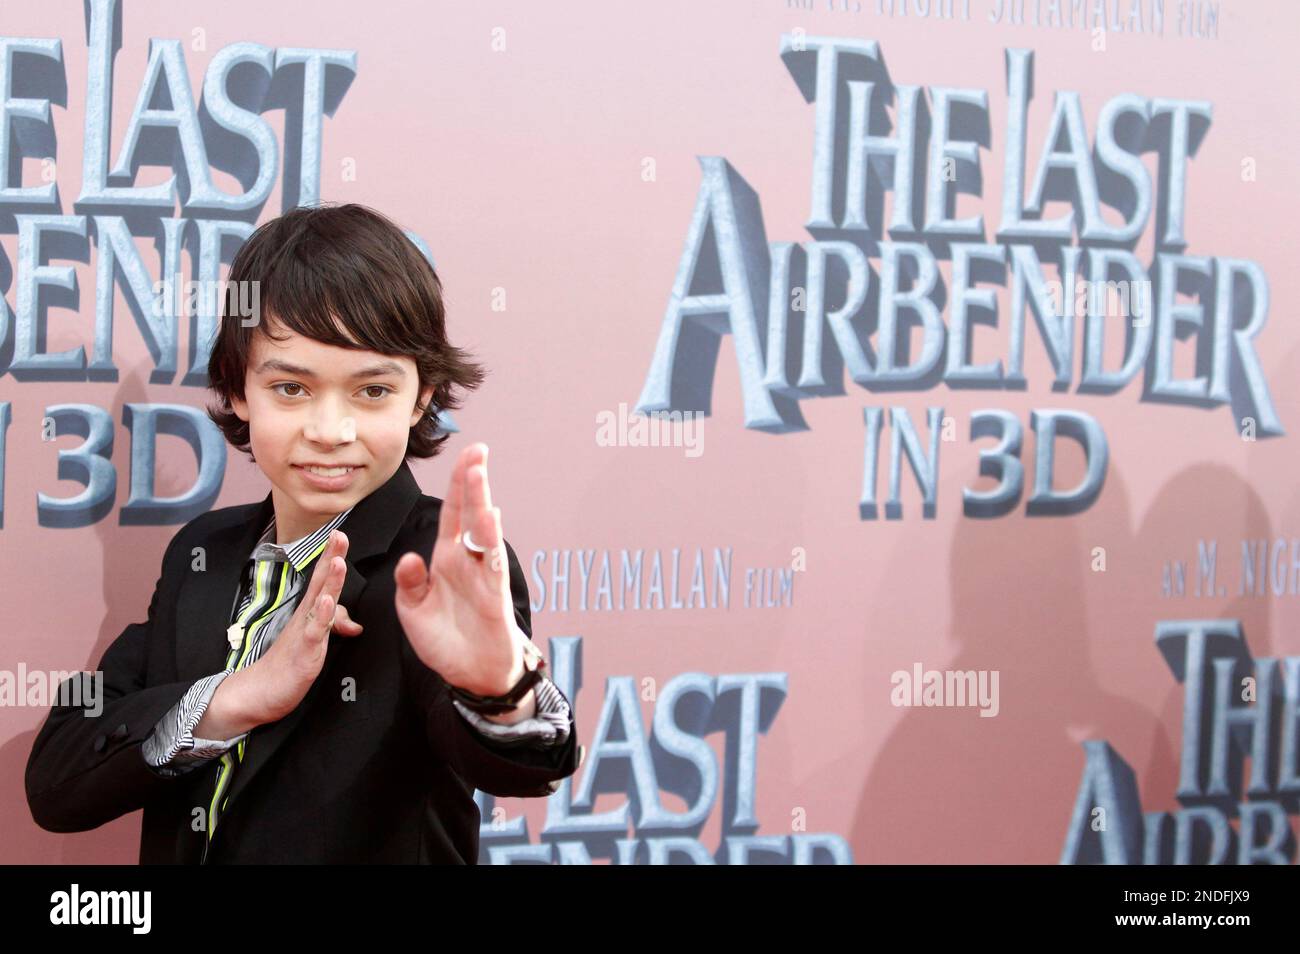 Noah Ringer arrives to the premiere of "The Last Airbender" in New York,  Wednesday, June 30, 2010. (AP Photo/Peter Kramer Stock Photo - Alamy